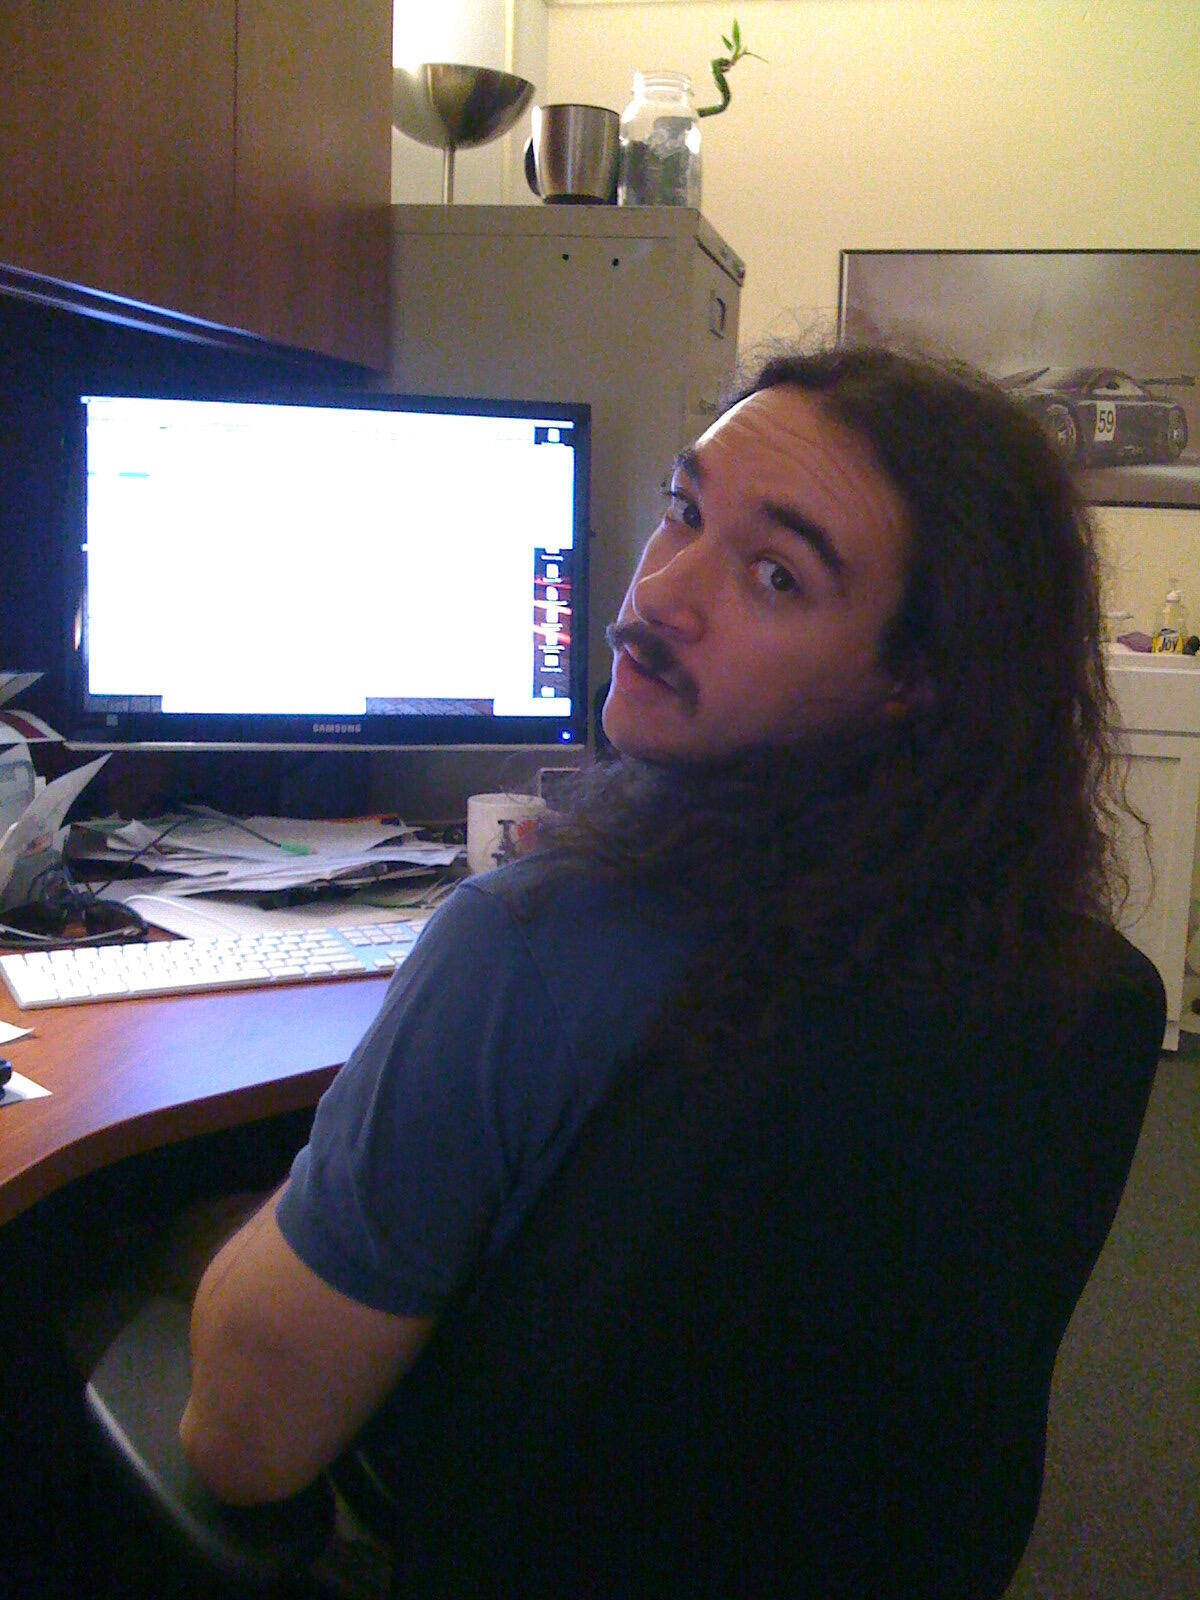 matt looking suave at his desk with long hair